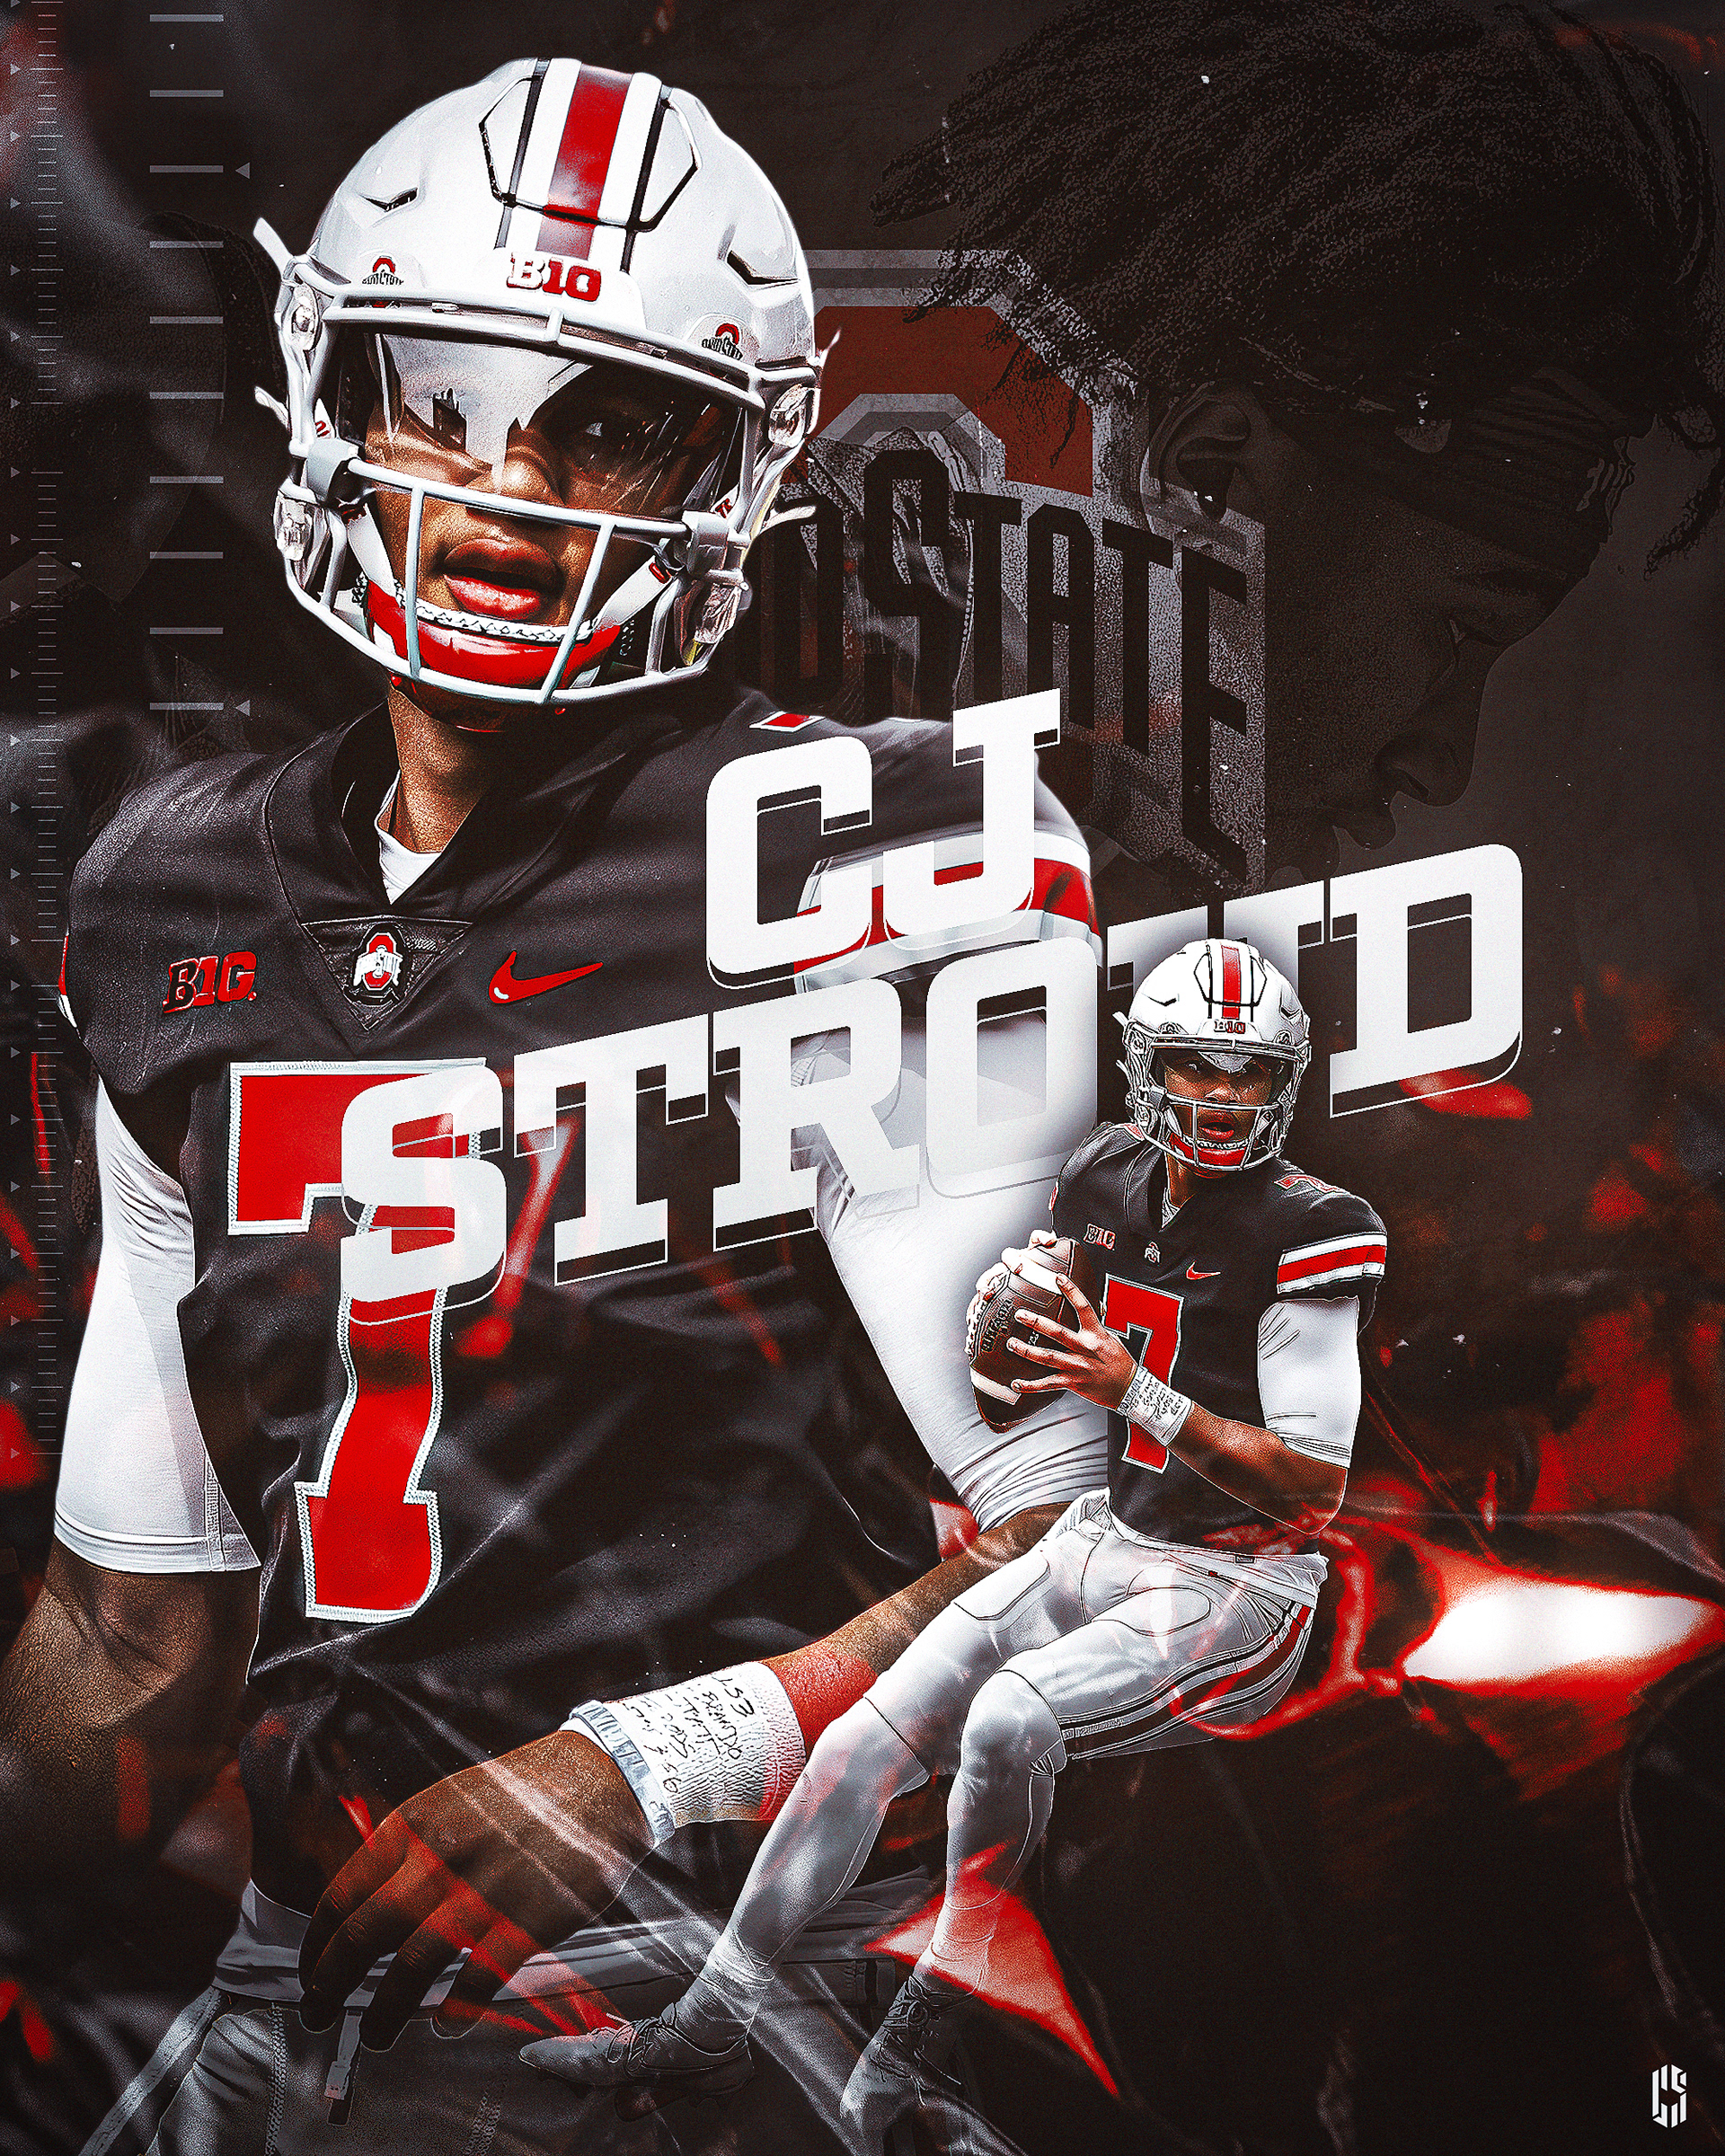 CJ Stroud Is More Than His Adversities